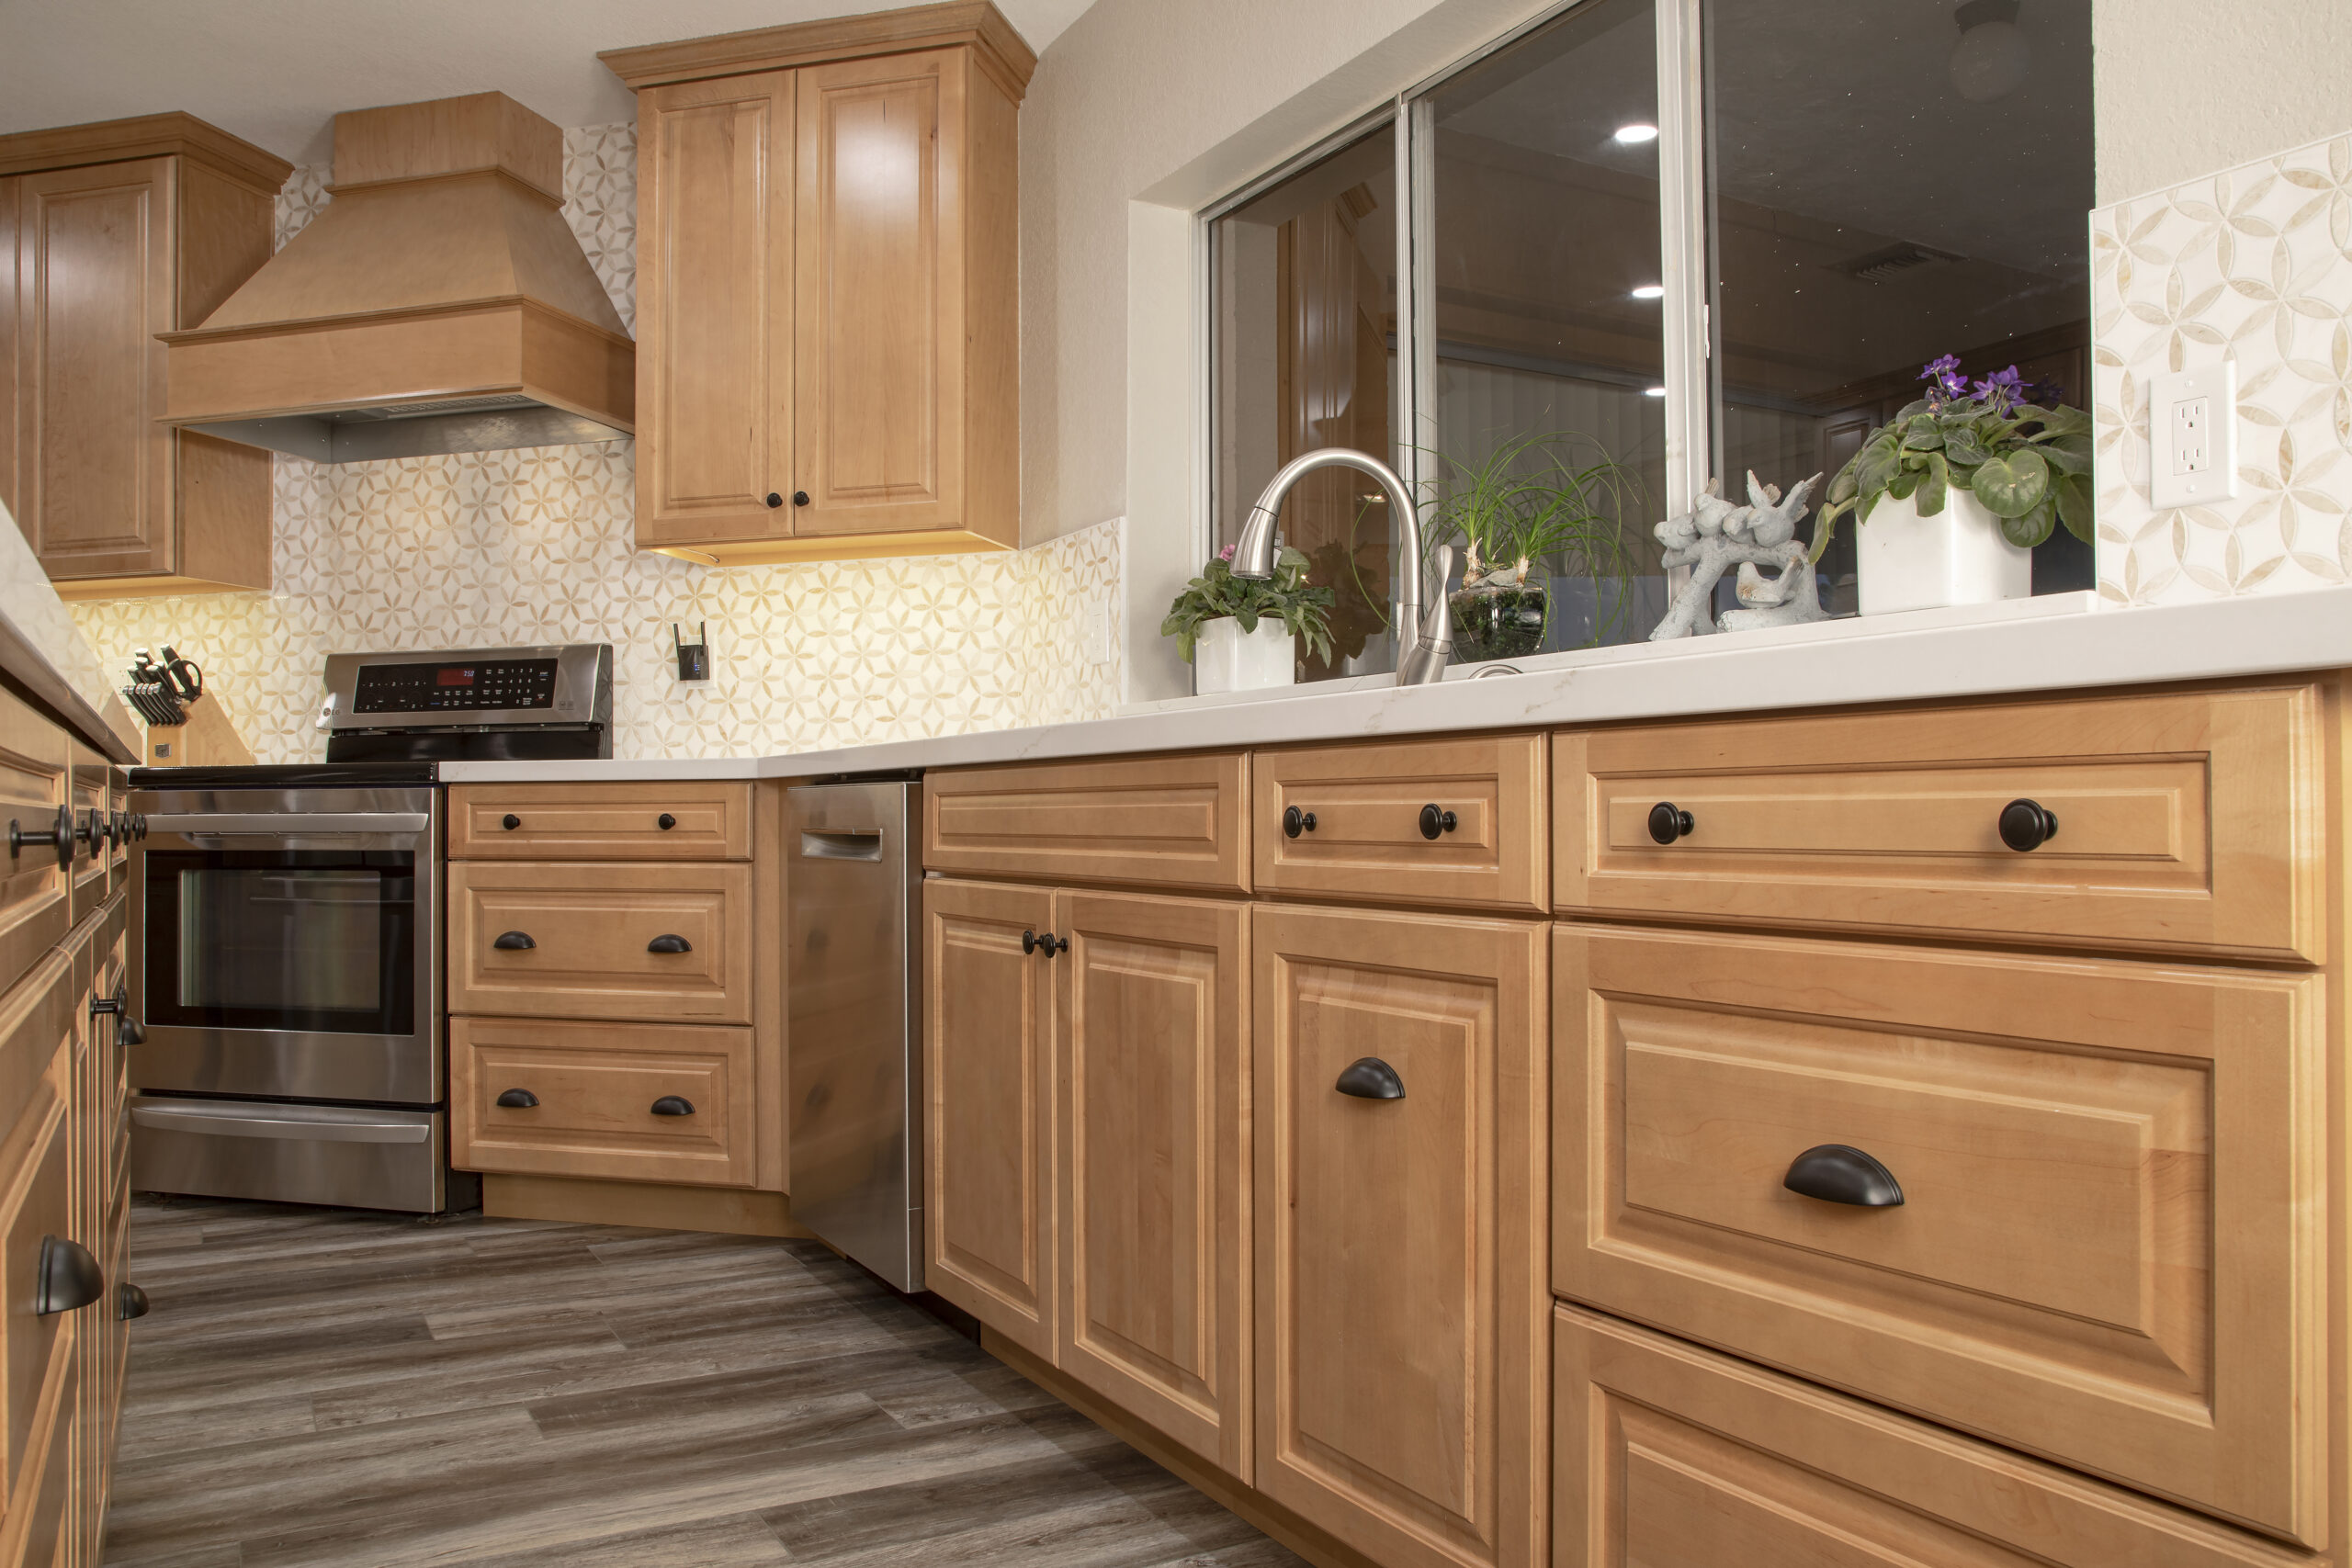 renovated cabinets by Rosie Right Remodeling